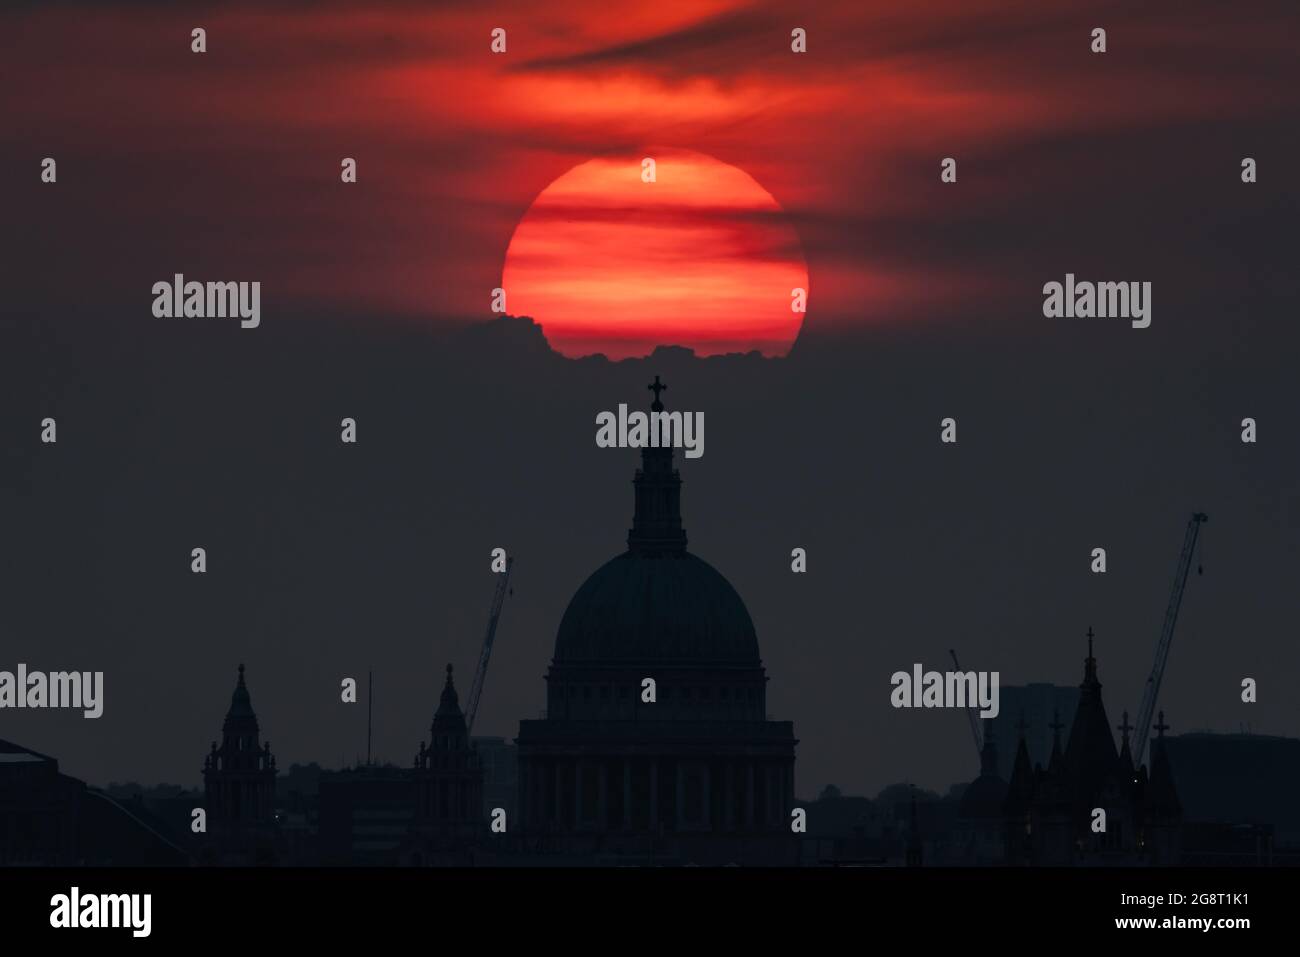 London, UK. 22nd July, 2021. UK Weather: Dramatic evening sunset over St. Paul's Cathedral ends another day of city heatwave also bringing the first ever amber extreme heat warning to be put in place this week. Credit: Guy Corbishley/Alamy Live News Stock Photo